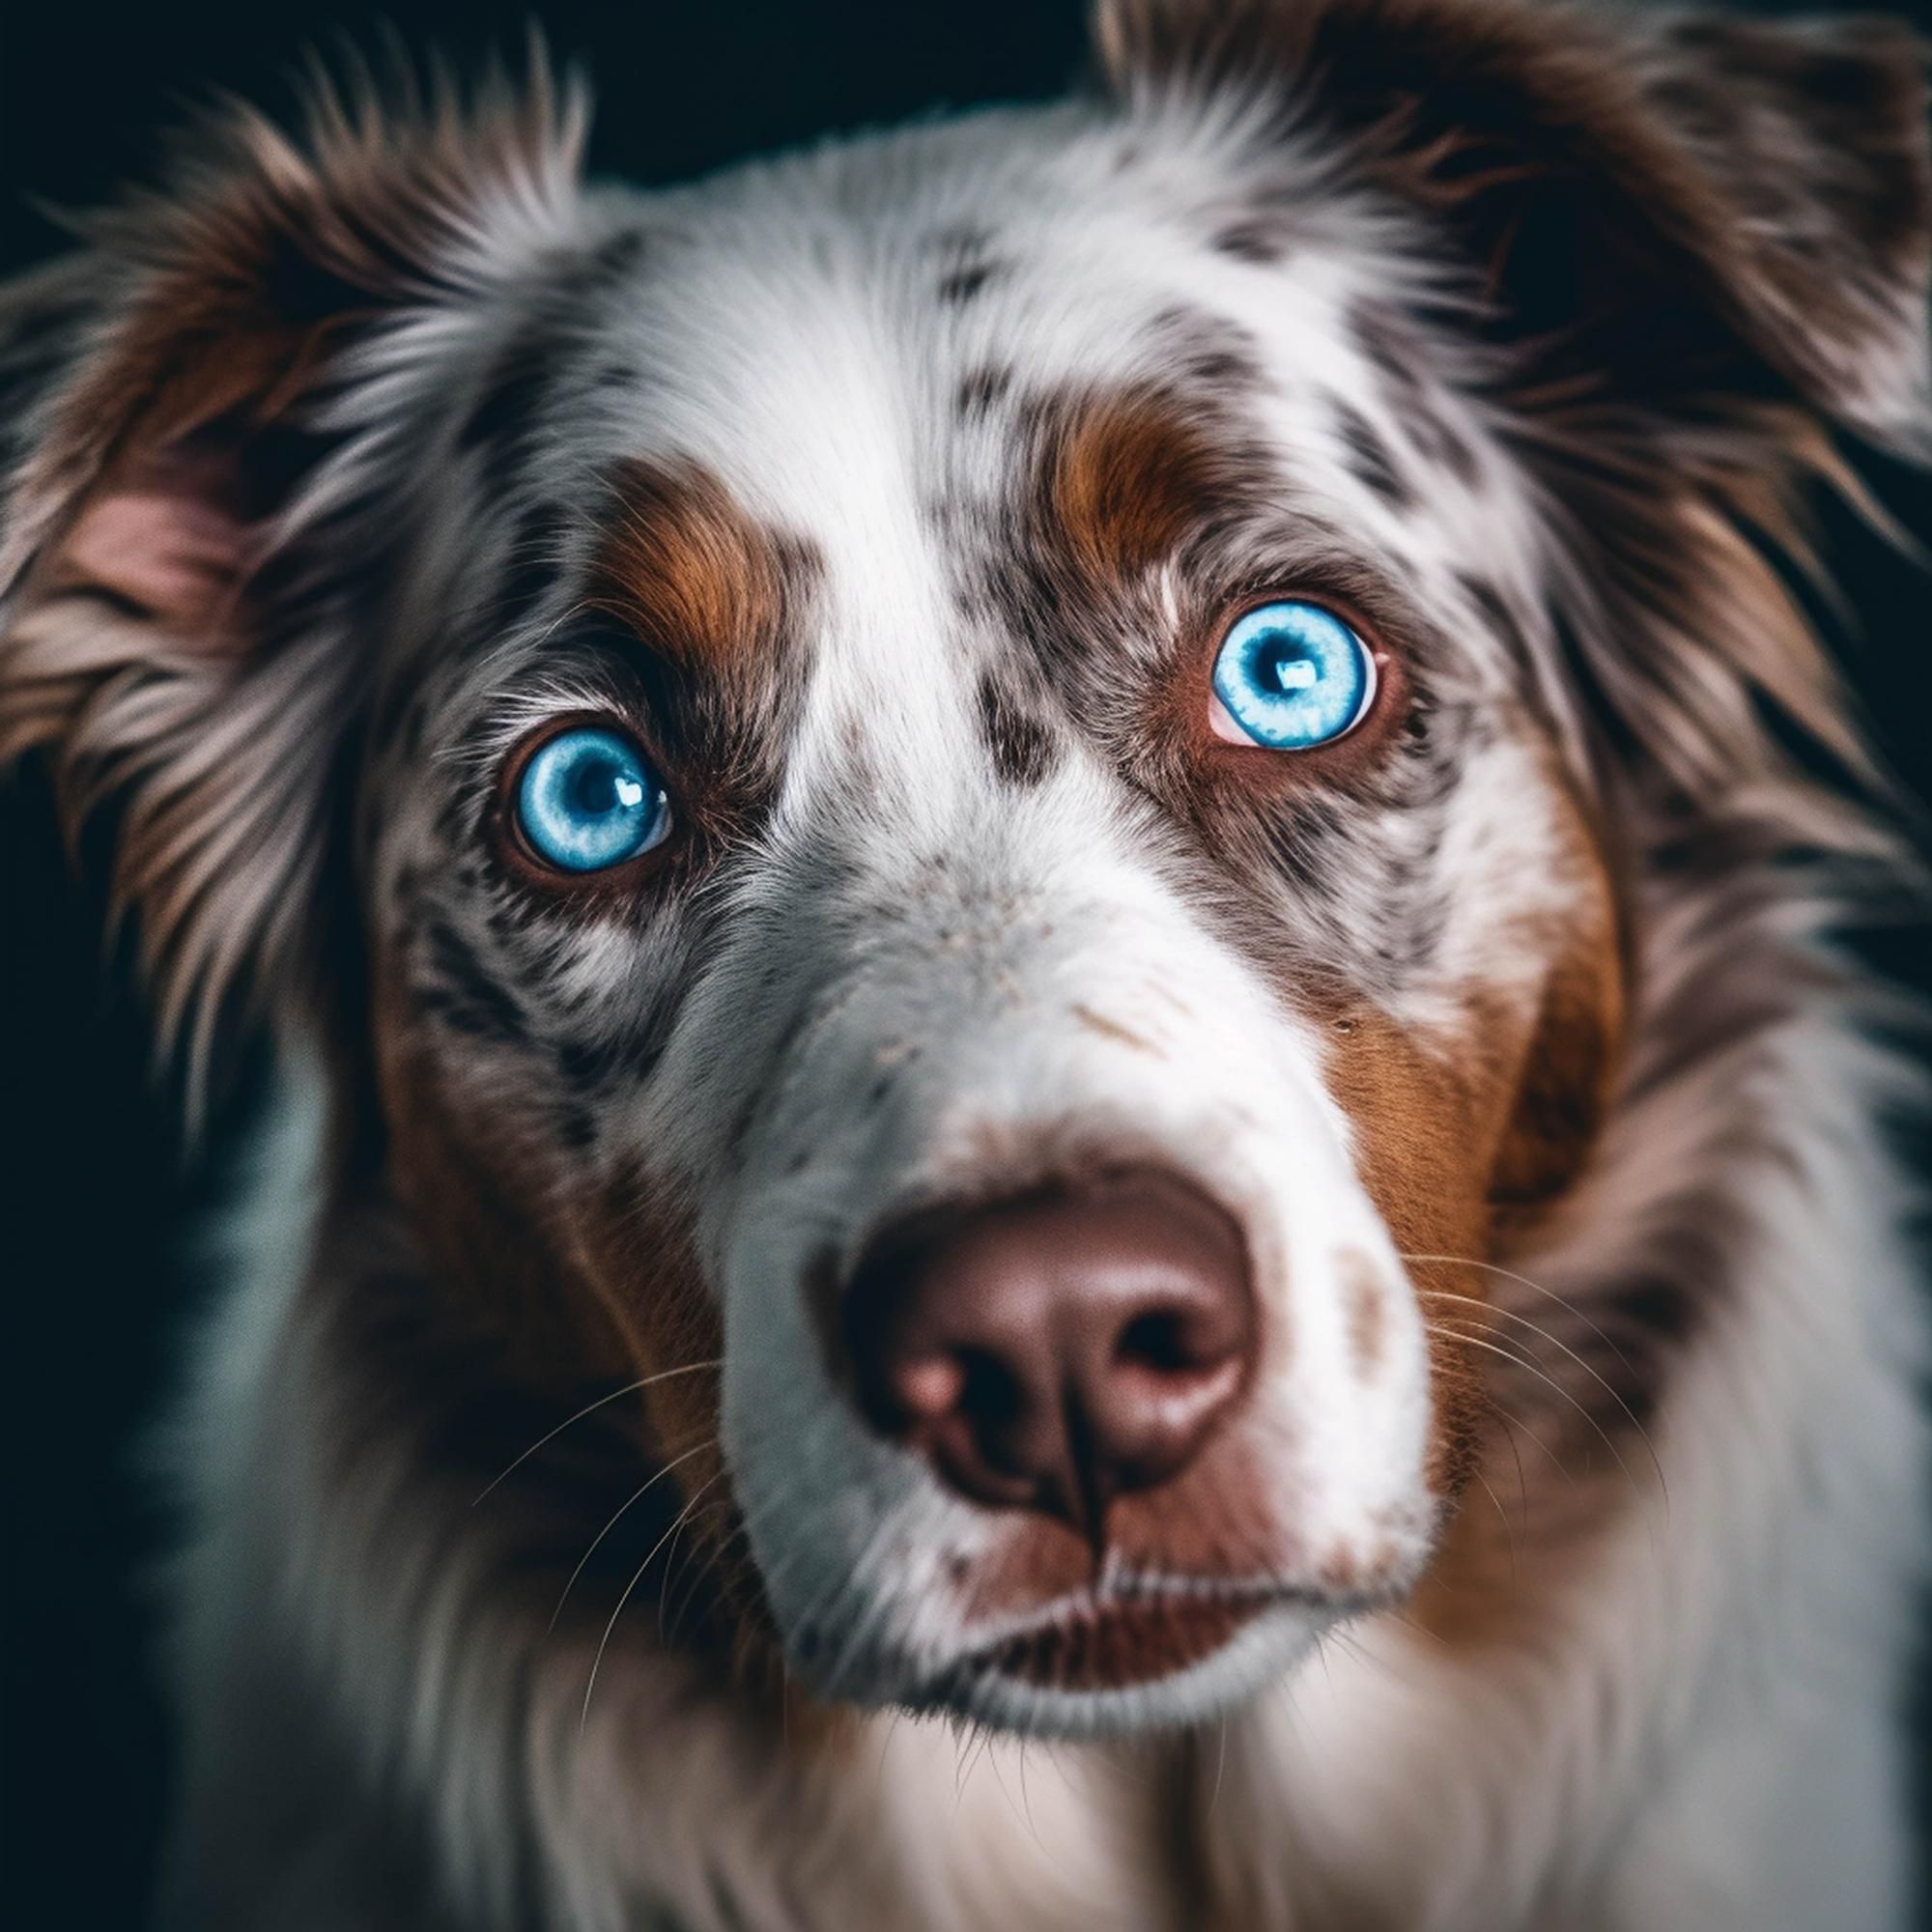 Why Do Dogs Eyes Glow in the Dark? Learn the Facts